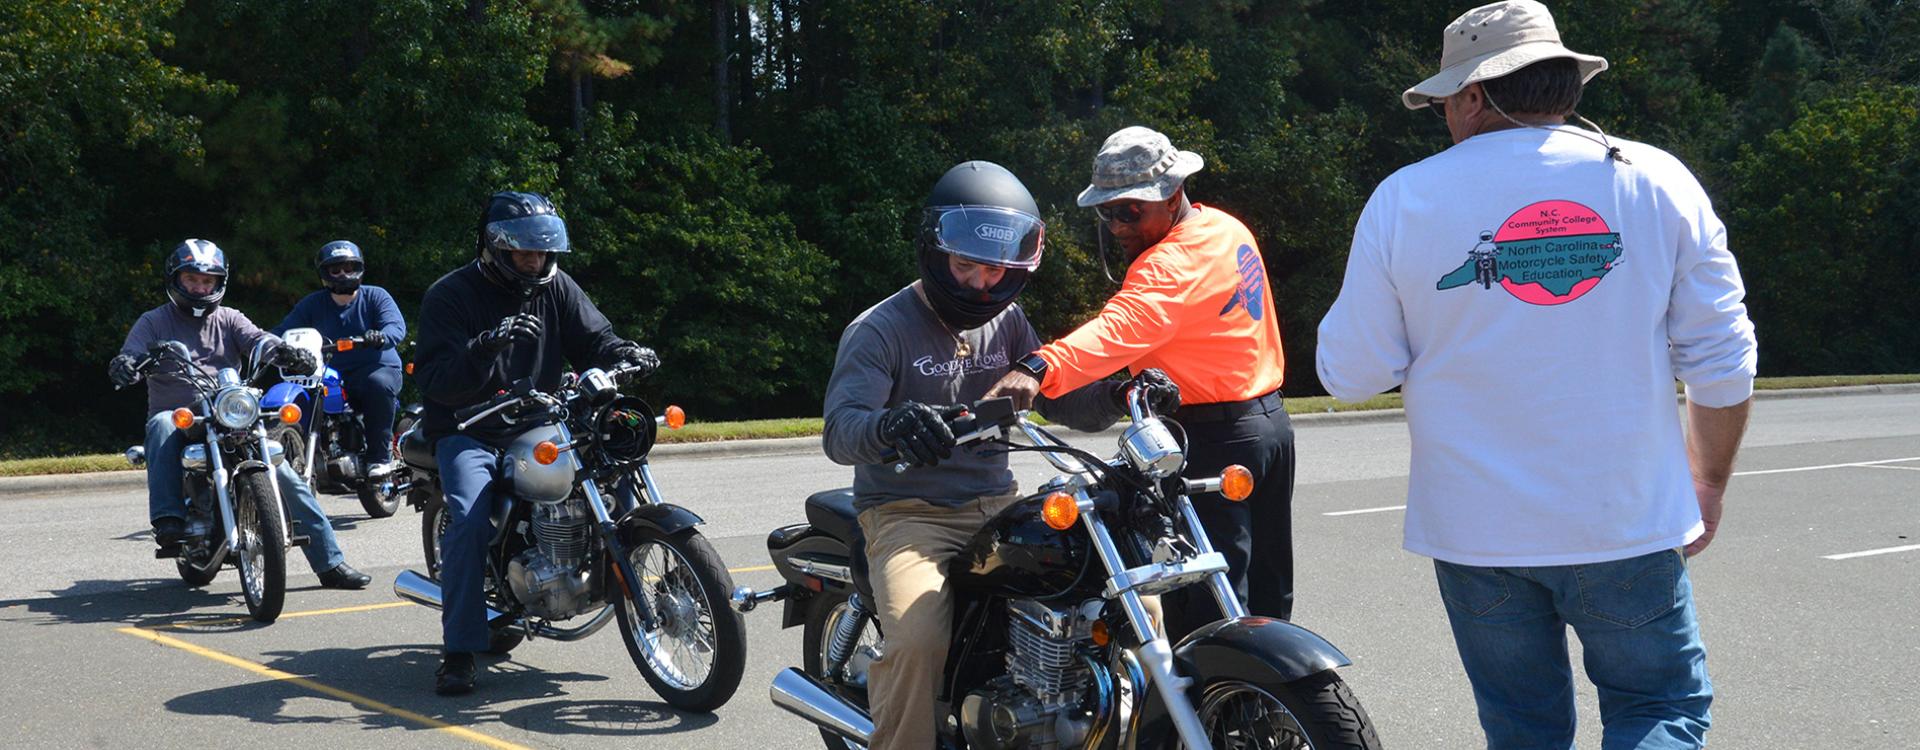 students ride motorcycles in a line as the instructor watches